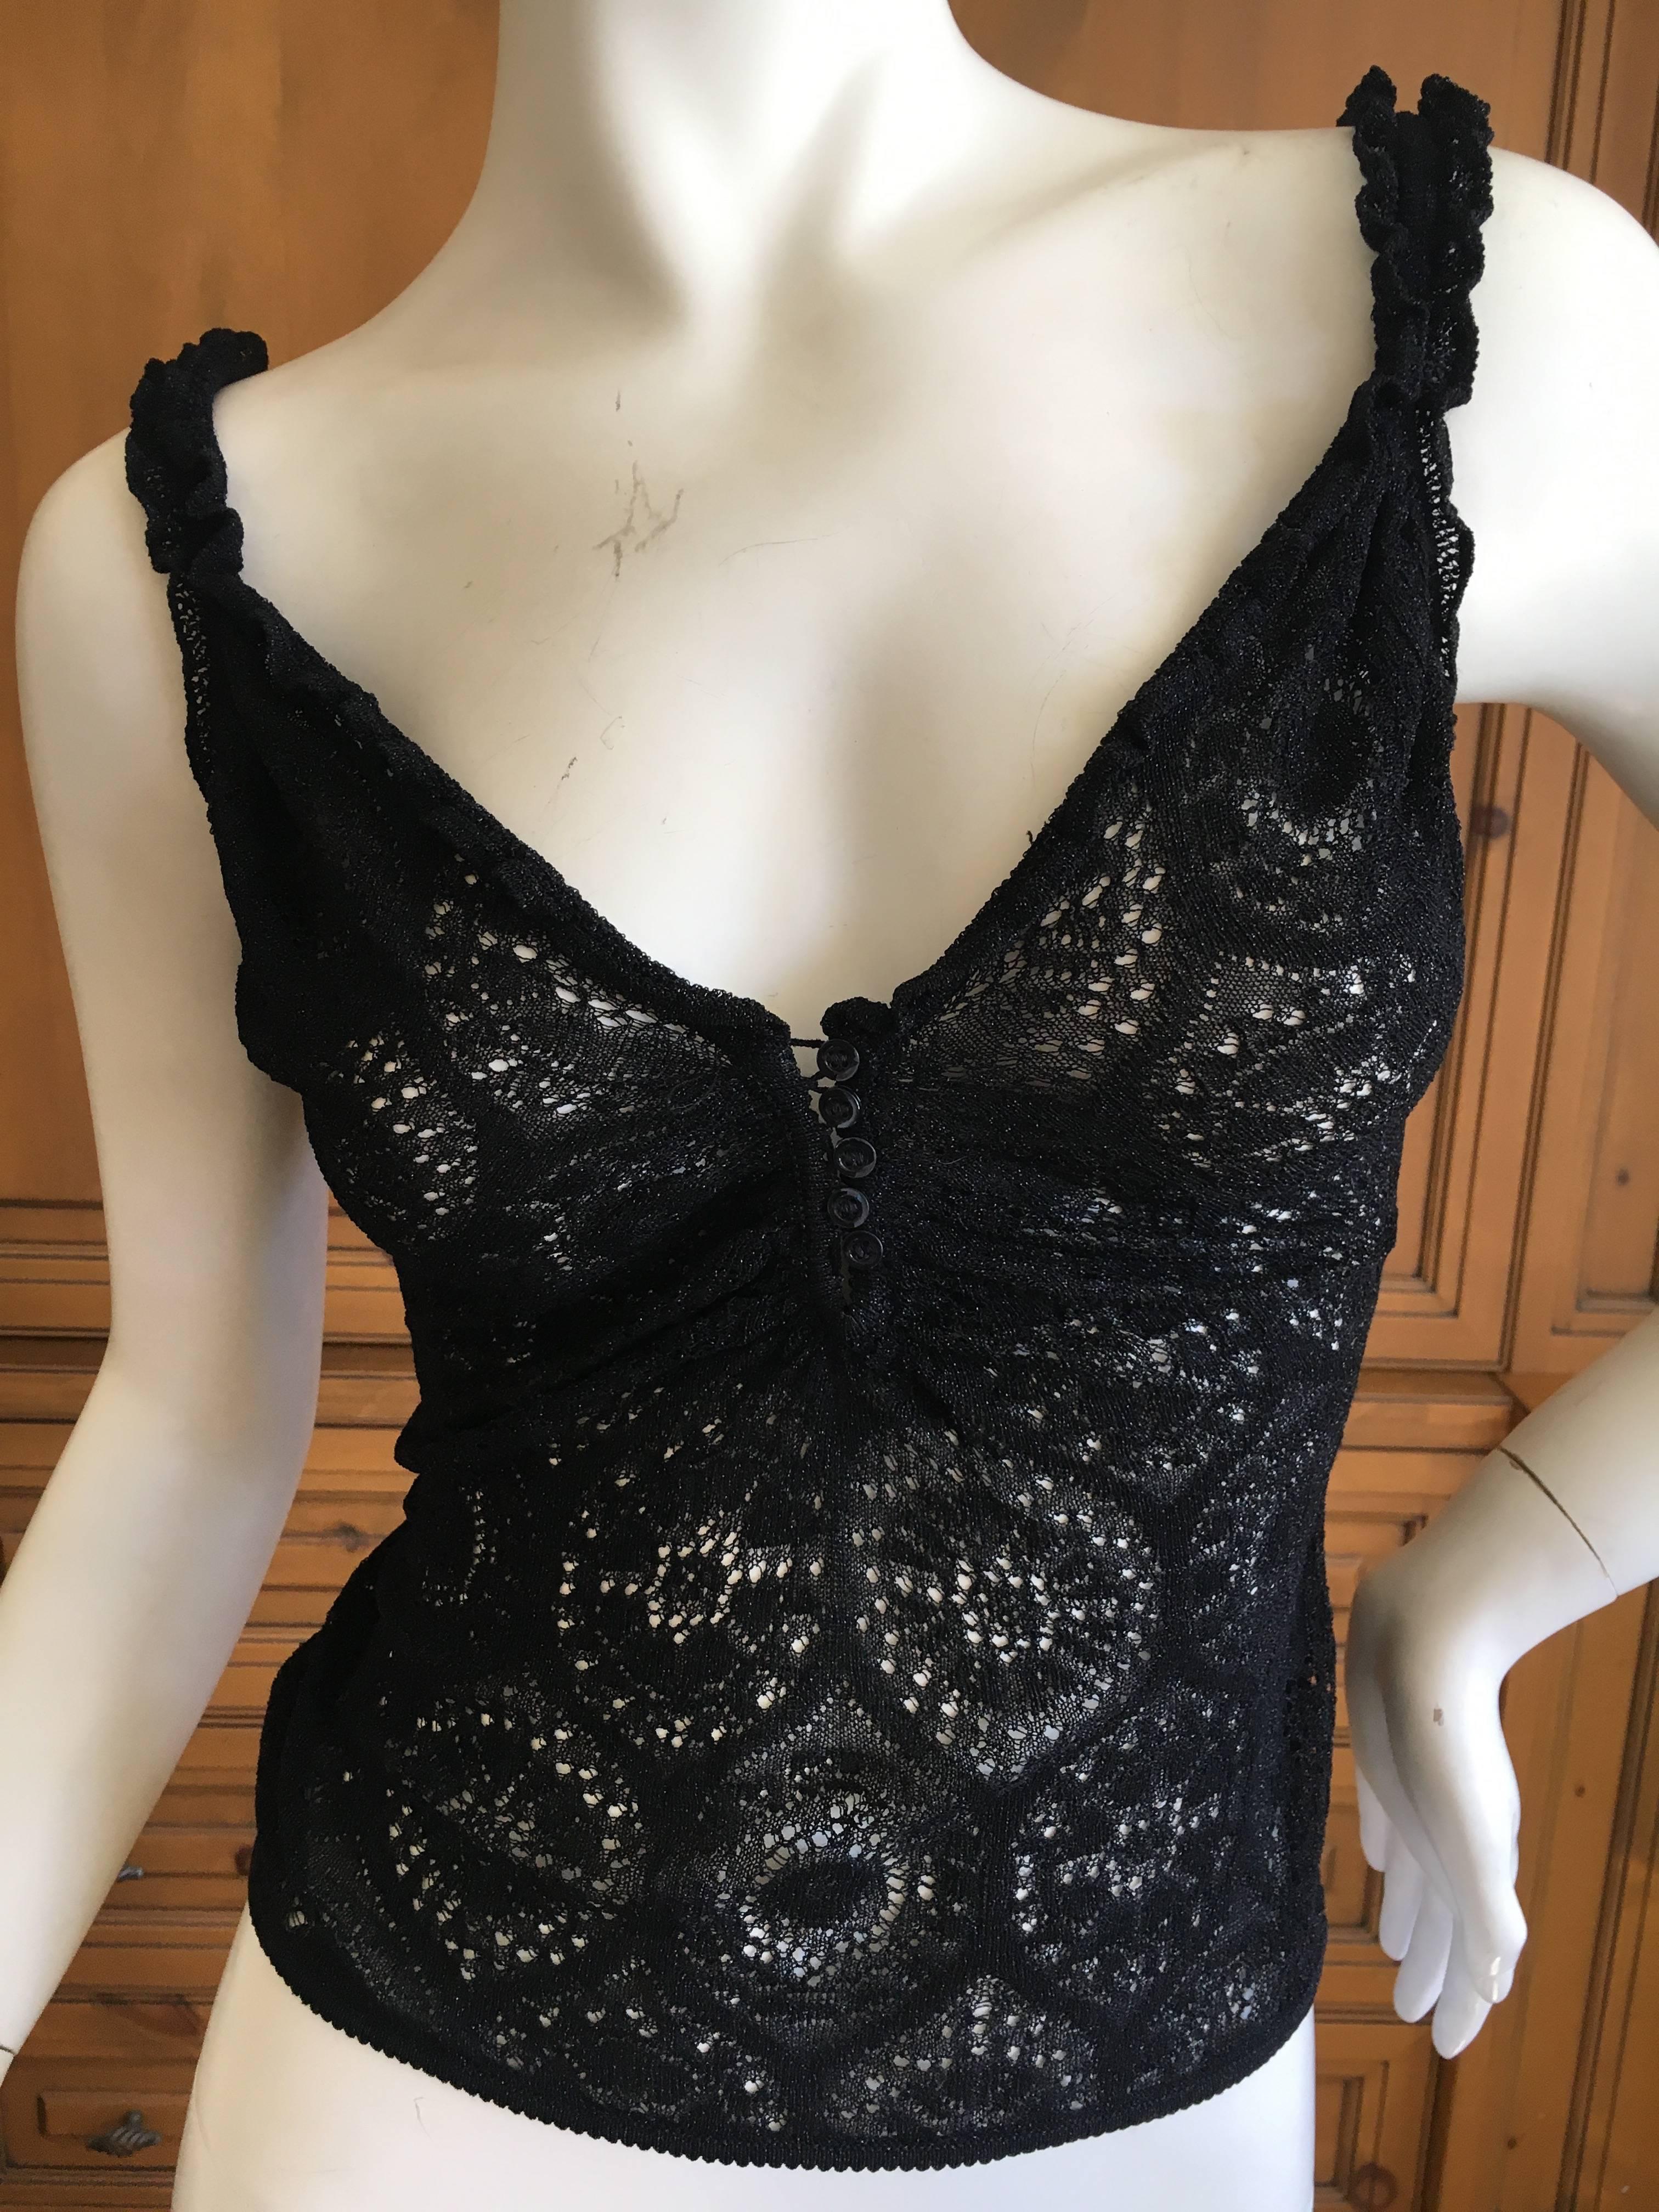 John Galliano for Bergdorf Goodman 1990's Button Front Lace Camisole.
Size small
Bust 36"
Length 25"
Excellent condition